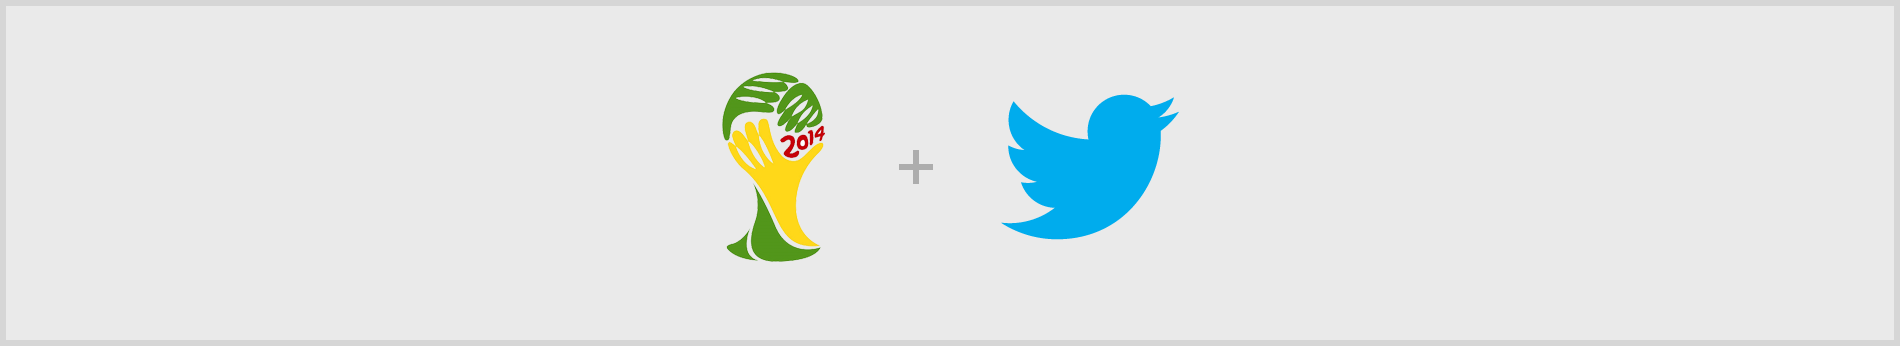 How to Show Your World Cup Pride on Twitter